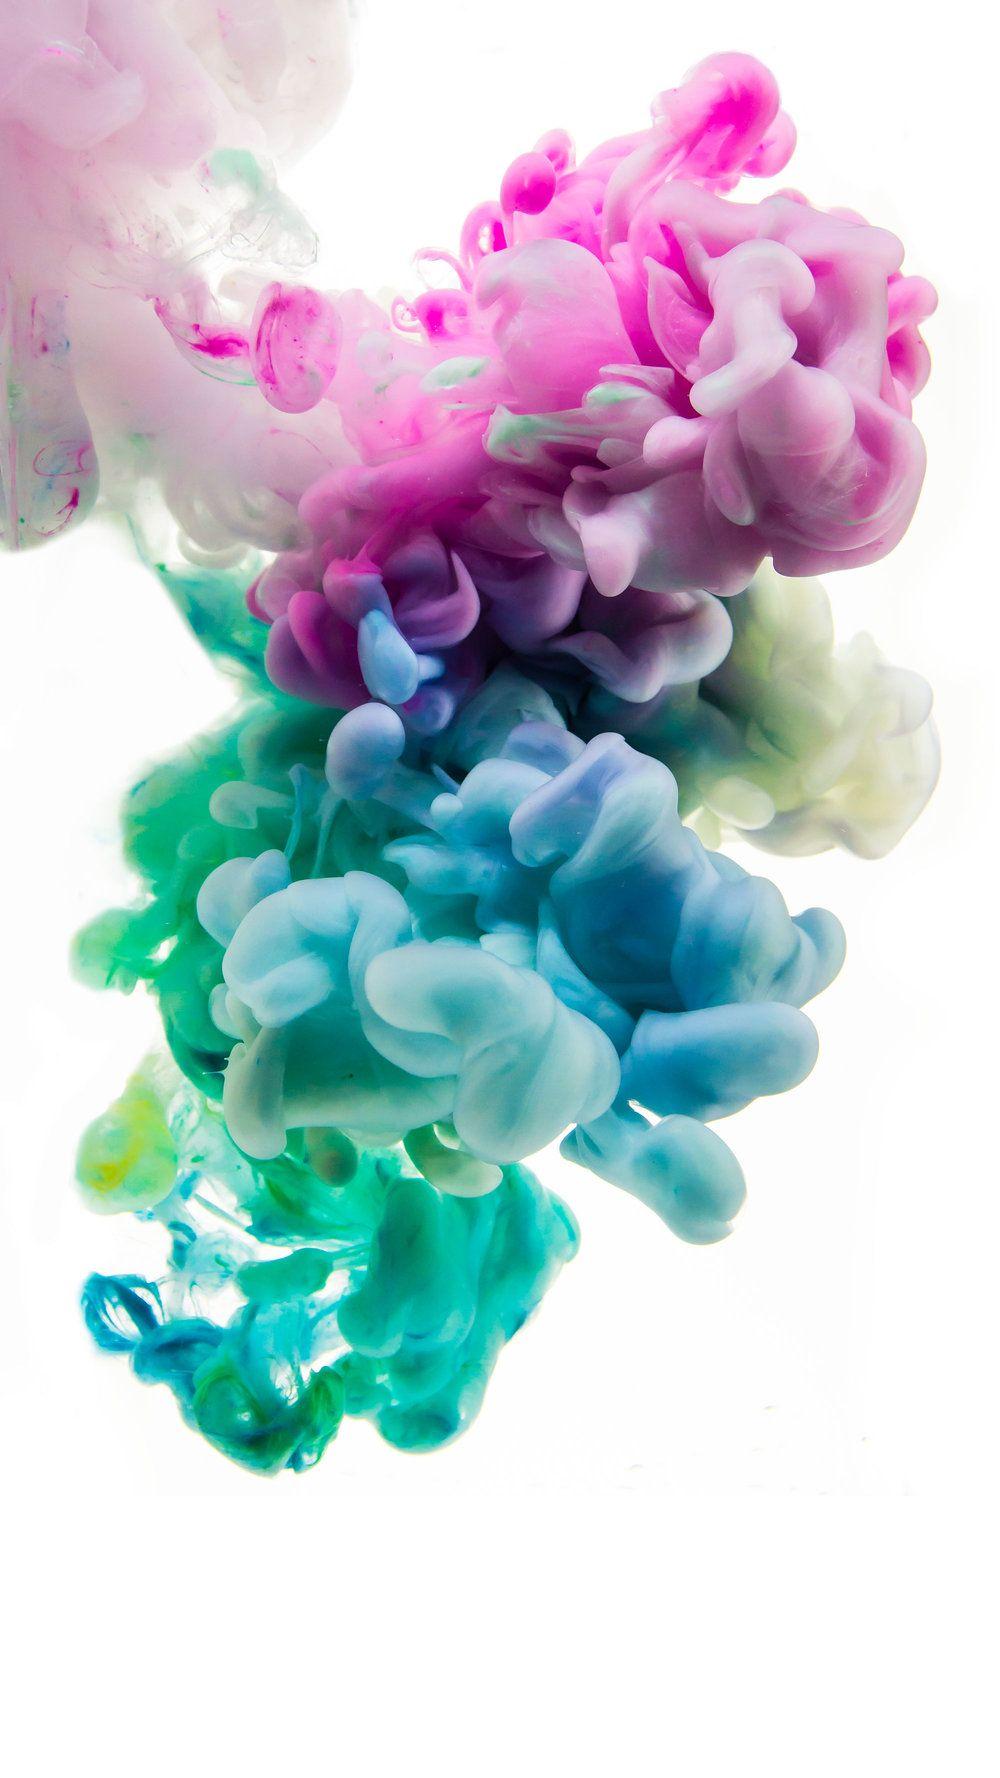 Ink Tornado by Jessica Kenyon. Colourful wallpaper iphone, Colorful wallpaper, Pretty wallpaper